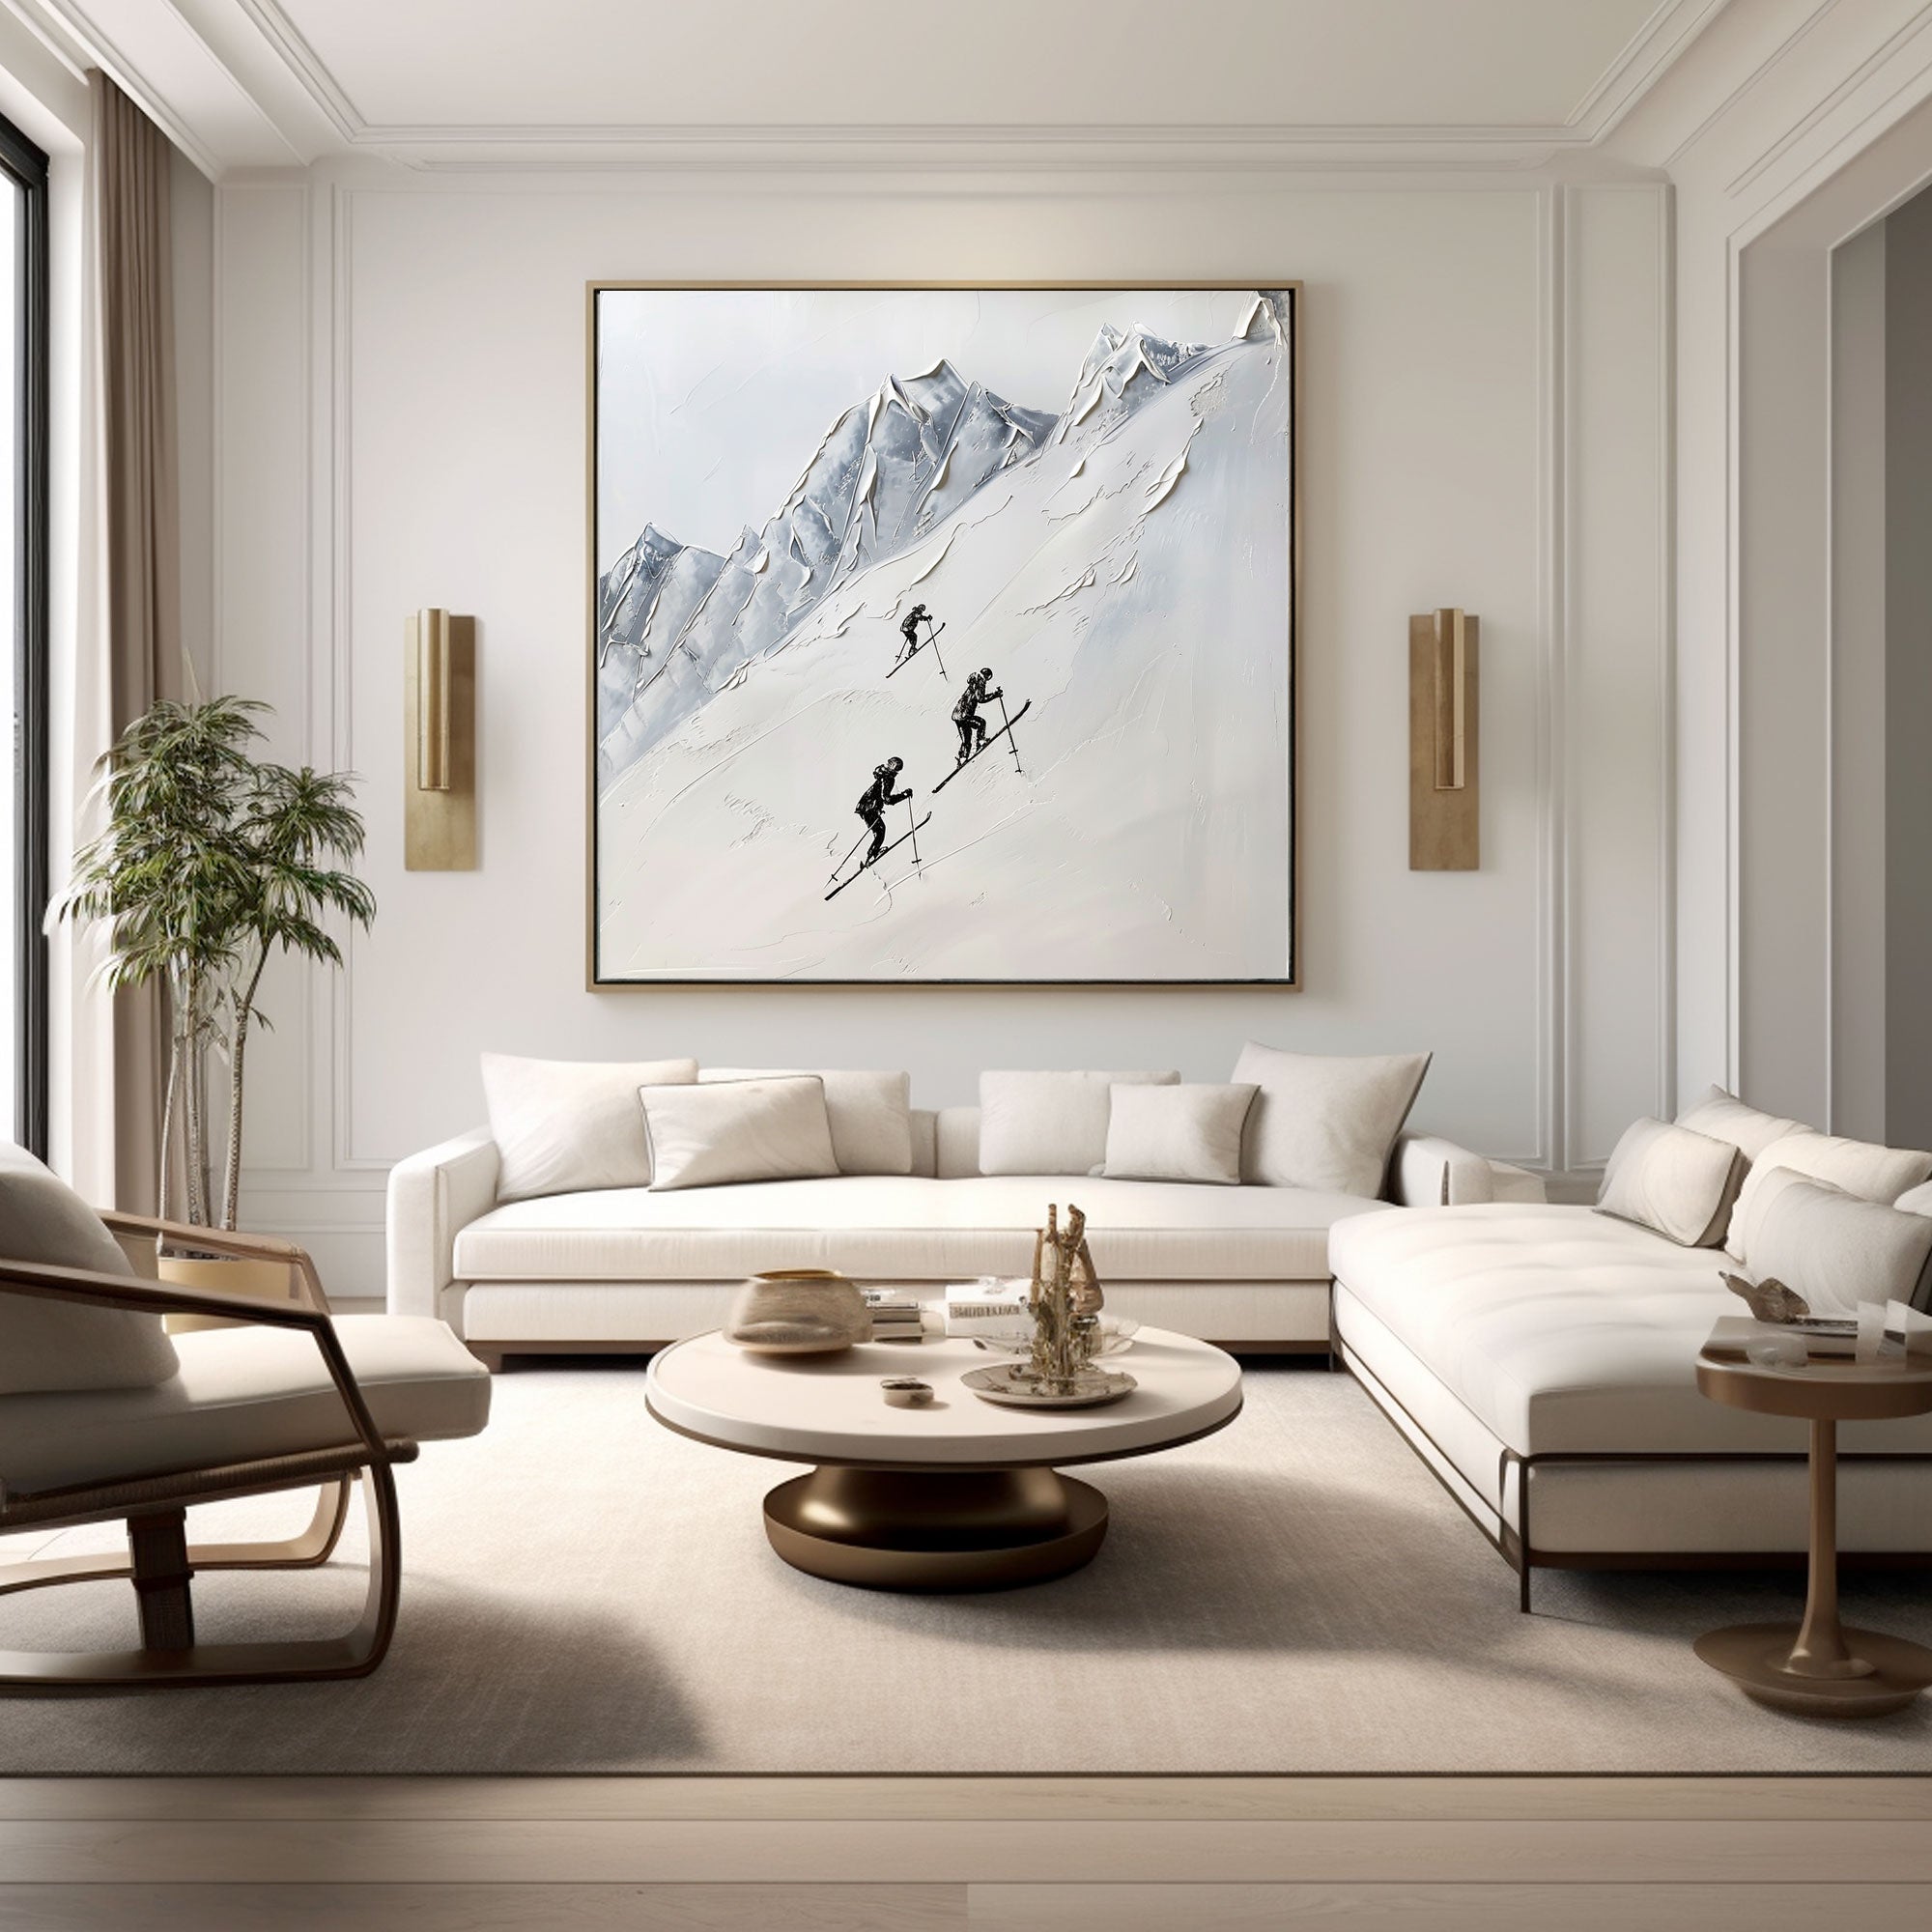 Abstract Art Black And White Painting "Together Towards the Summit"